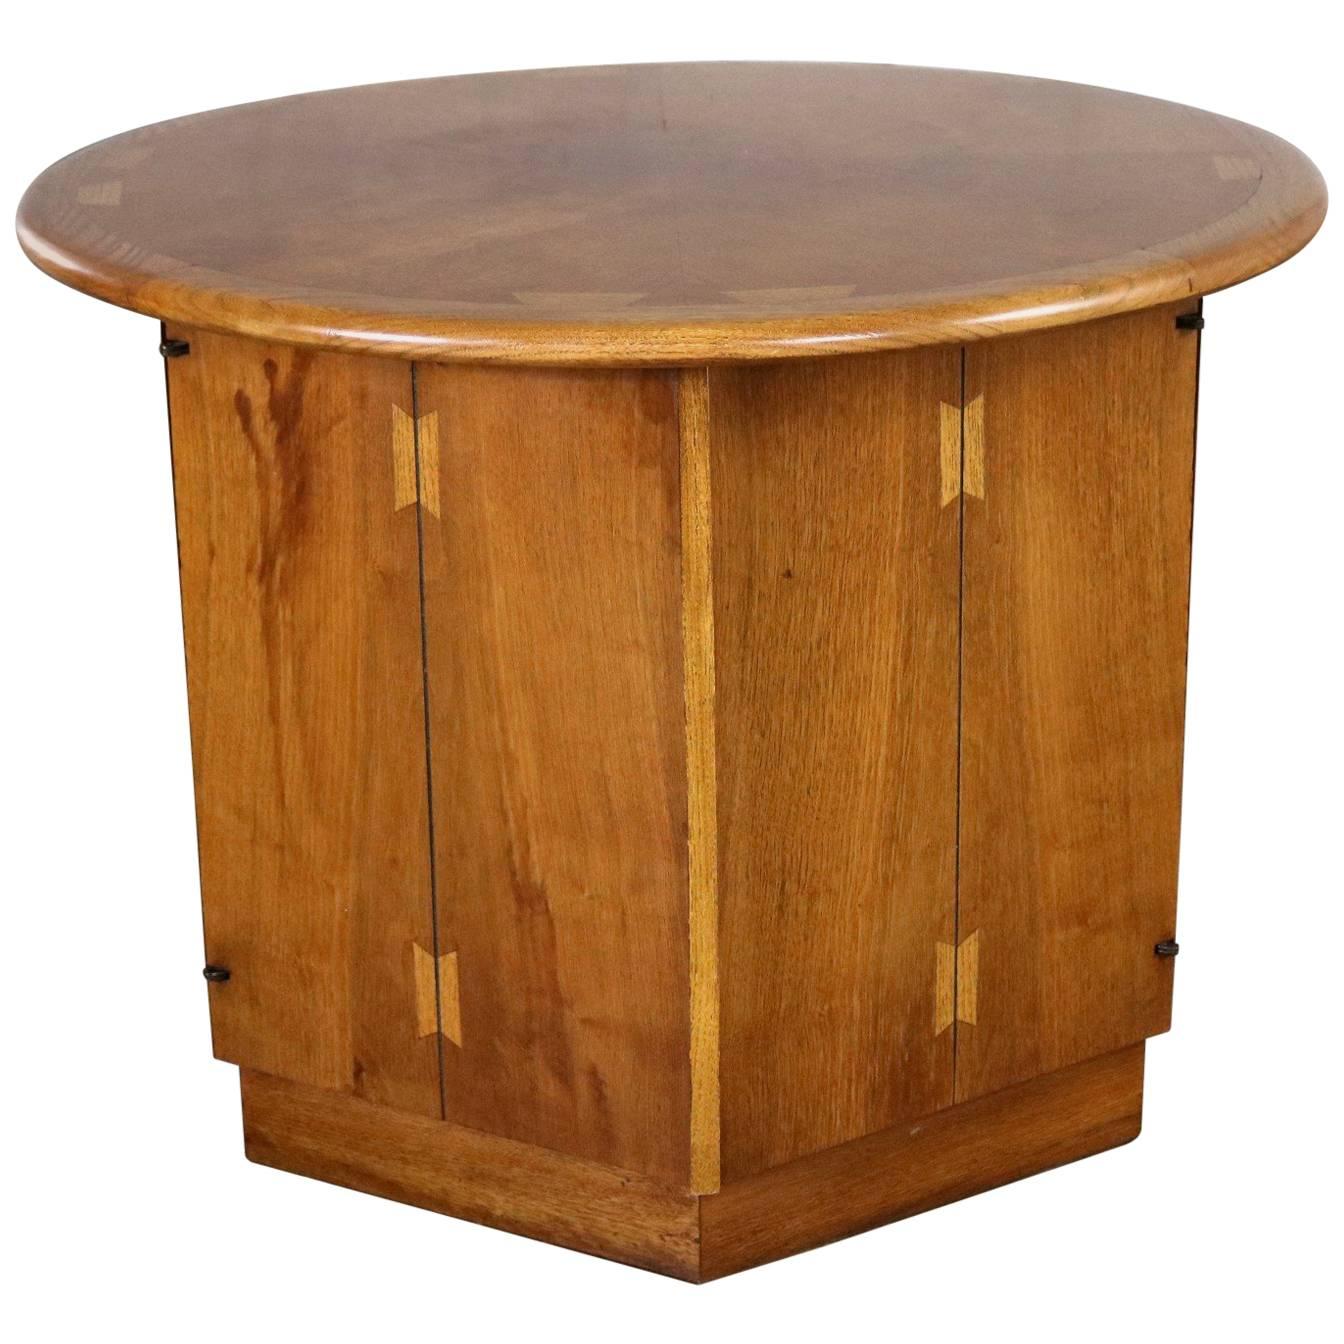 Lane Acclaim Dovetail End Table Round Top and Hexagon Cabinet Base by Andre Bus